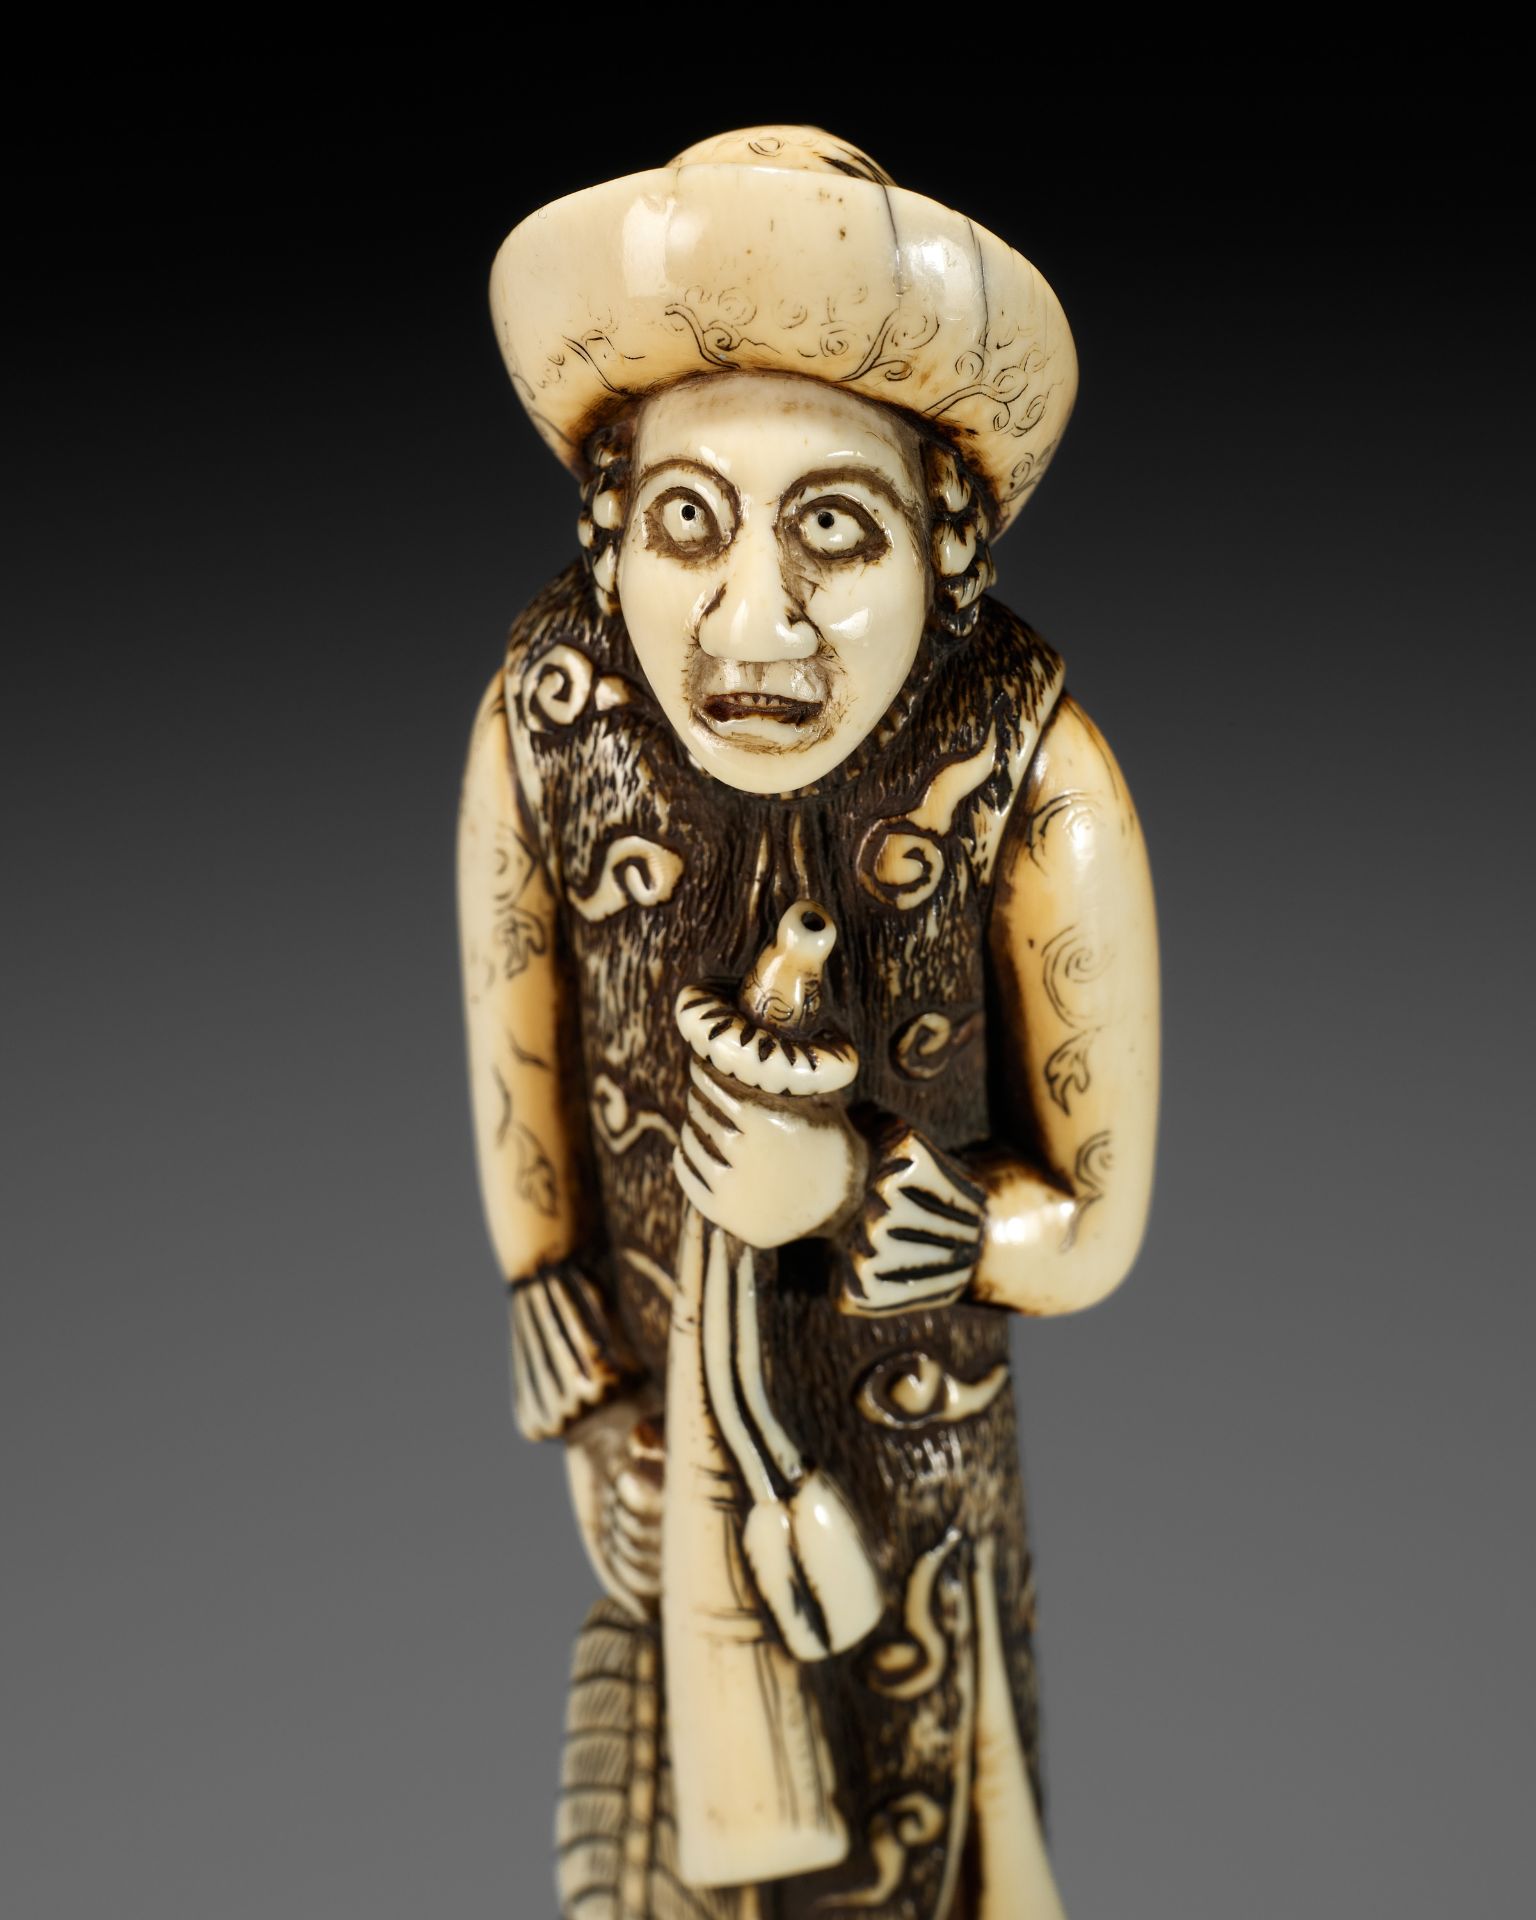 A SUPERB AND LARGE IVORY NETSUKE OF A DUTCHMAN WITH A TRUMPET